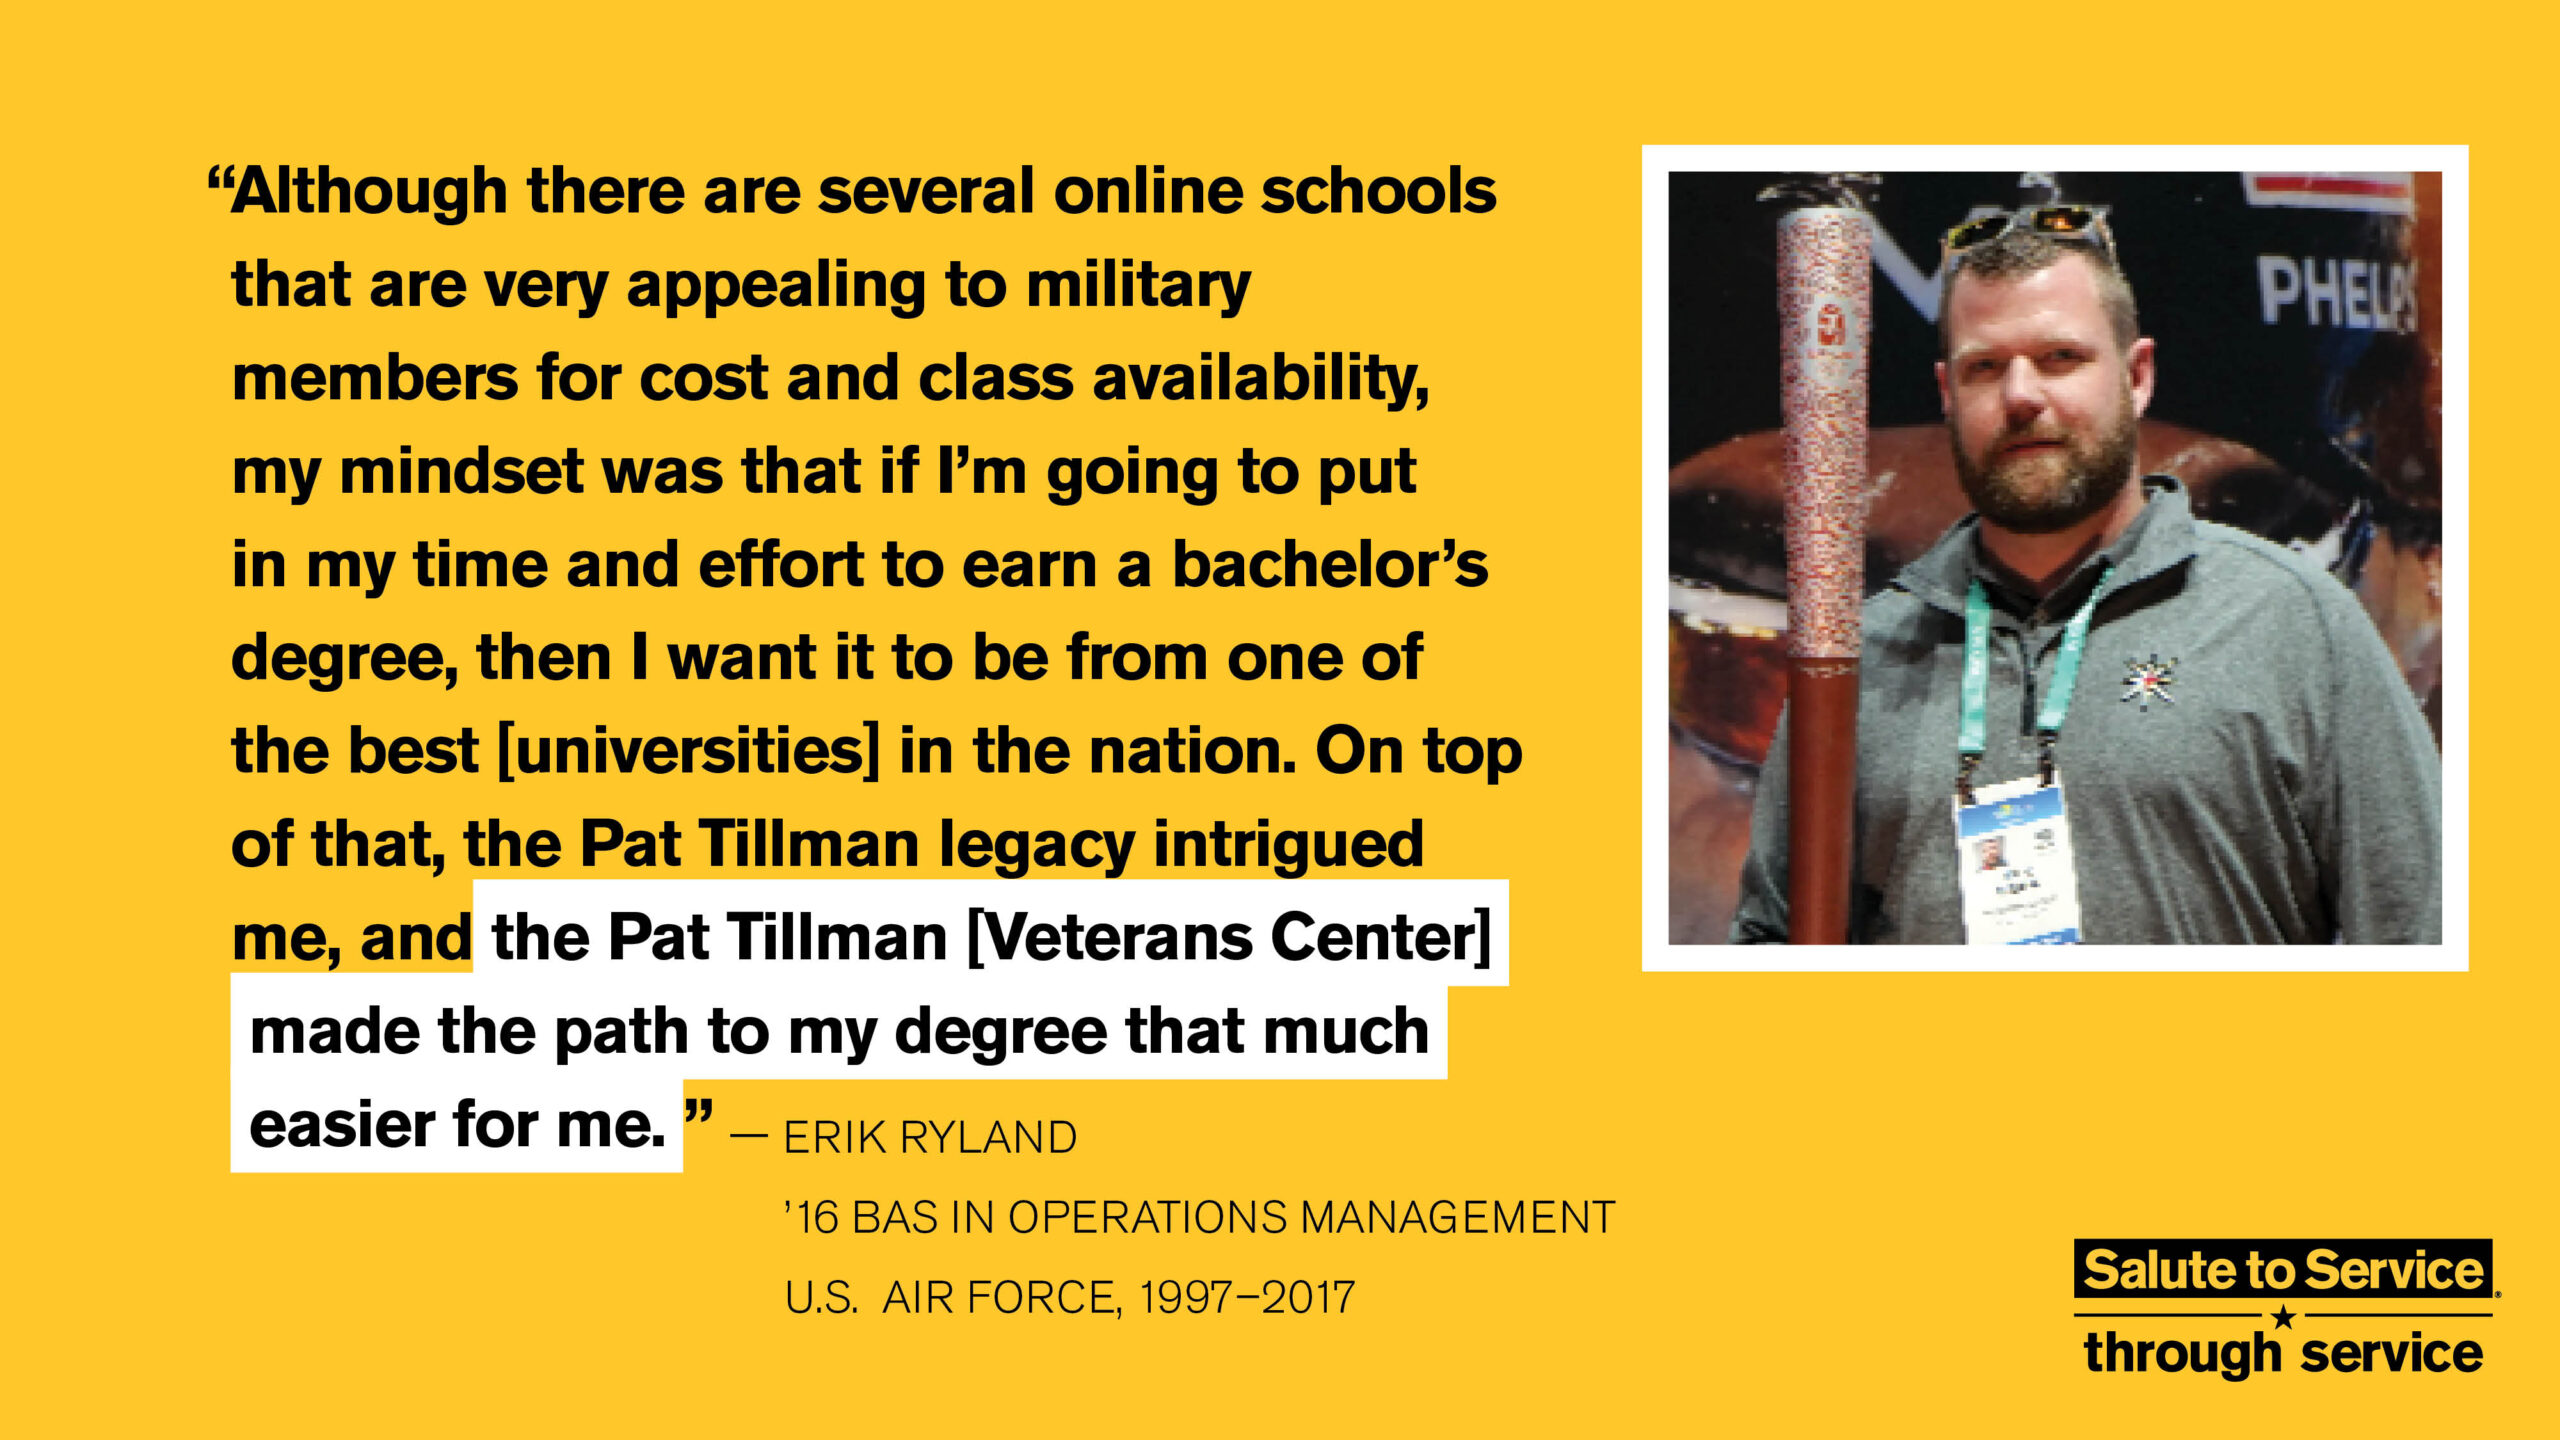 Salute to Service graphic with text that says "Although there are several online schools that are very appealing to military members for cost and class availability, my mindset was that if I'm going to put in my time and effort to earn a bachelor's degree, then I want it to be from one of the best [universities] in the nation. On top of that, the Pat Tillman legacy intrigued me, and the Pat Tillman [Veterans Center] made the path to my degree that much easier for me." - Erik Ryland